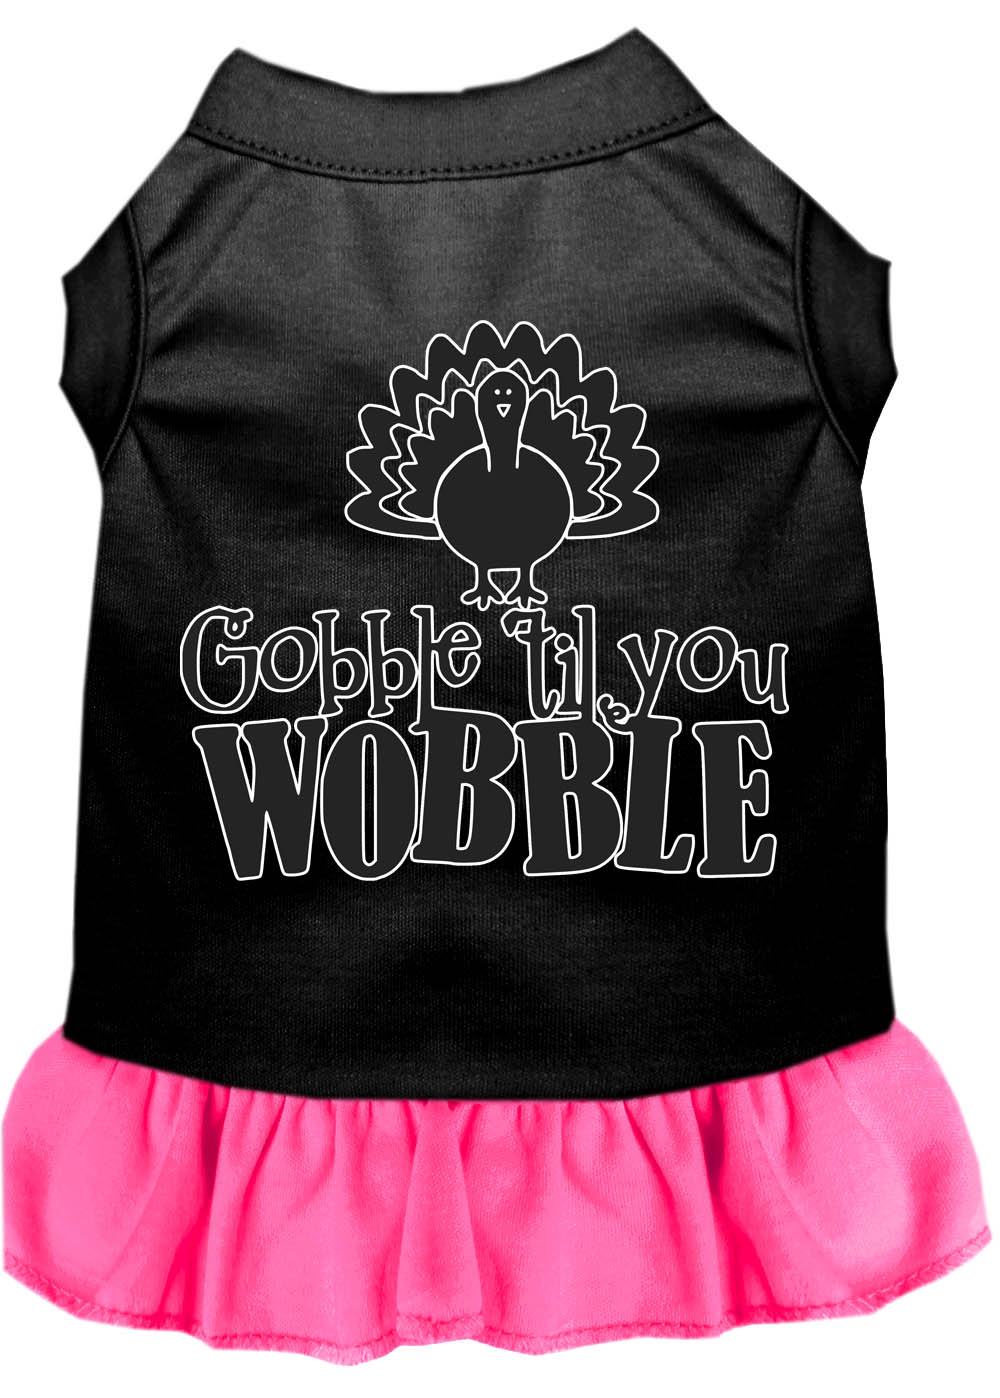 Gobble til You Wobble Screen Print Dog Dress Black with Bright Pink Lg